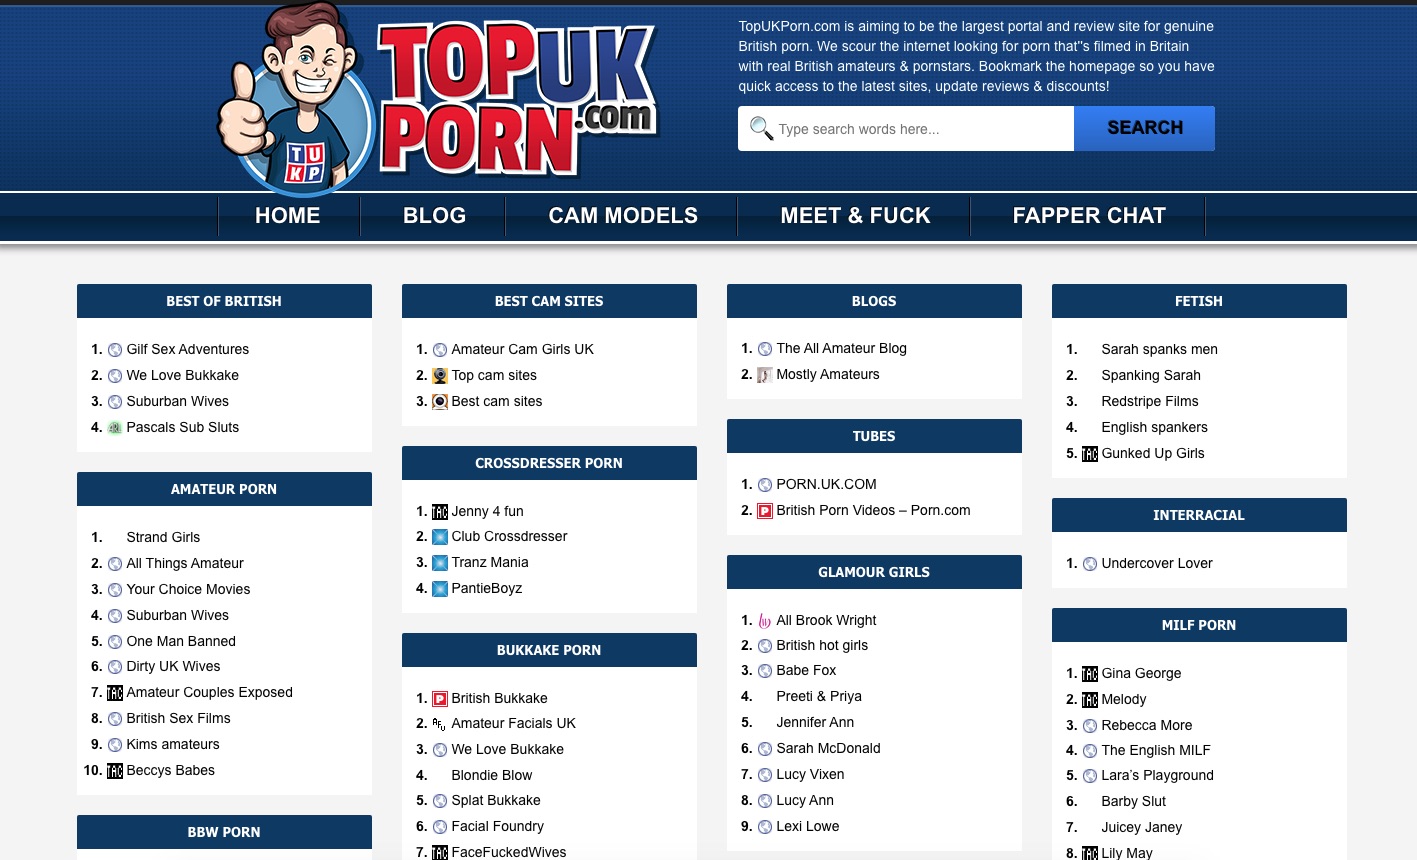 Find the best British porn sites at TopUKPorn photo photo